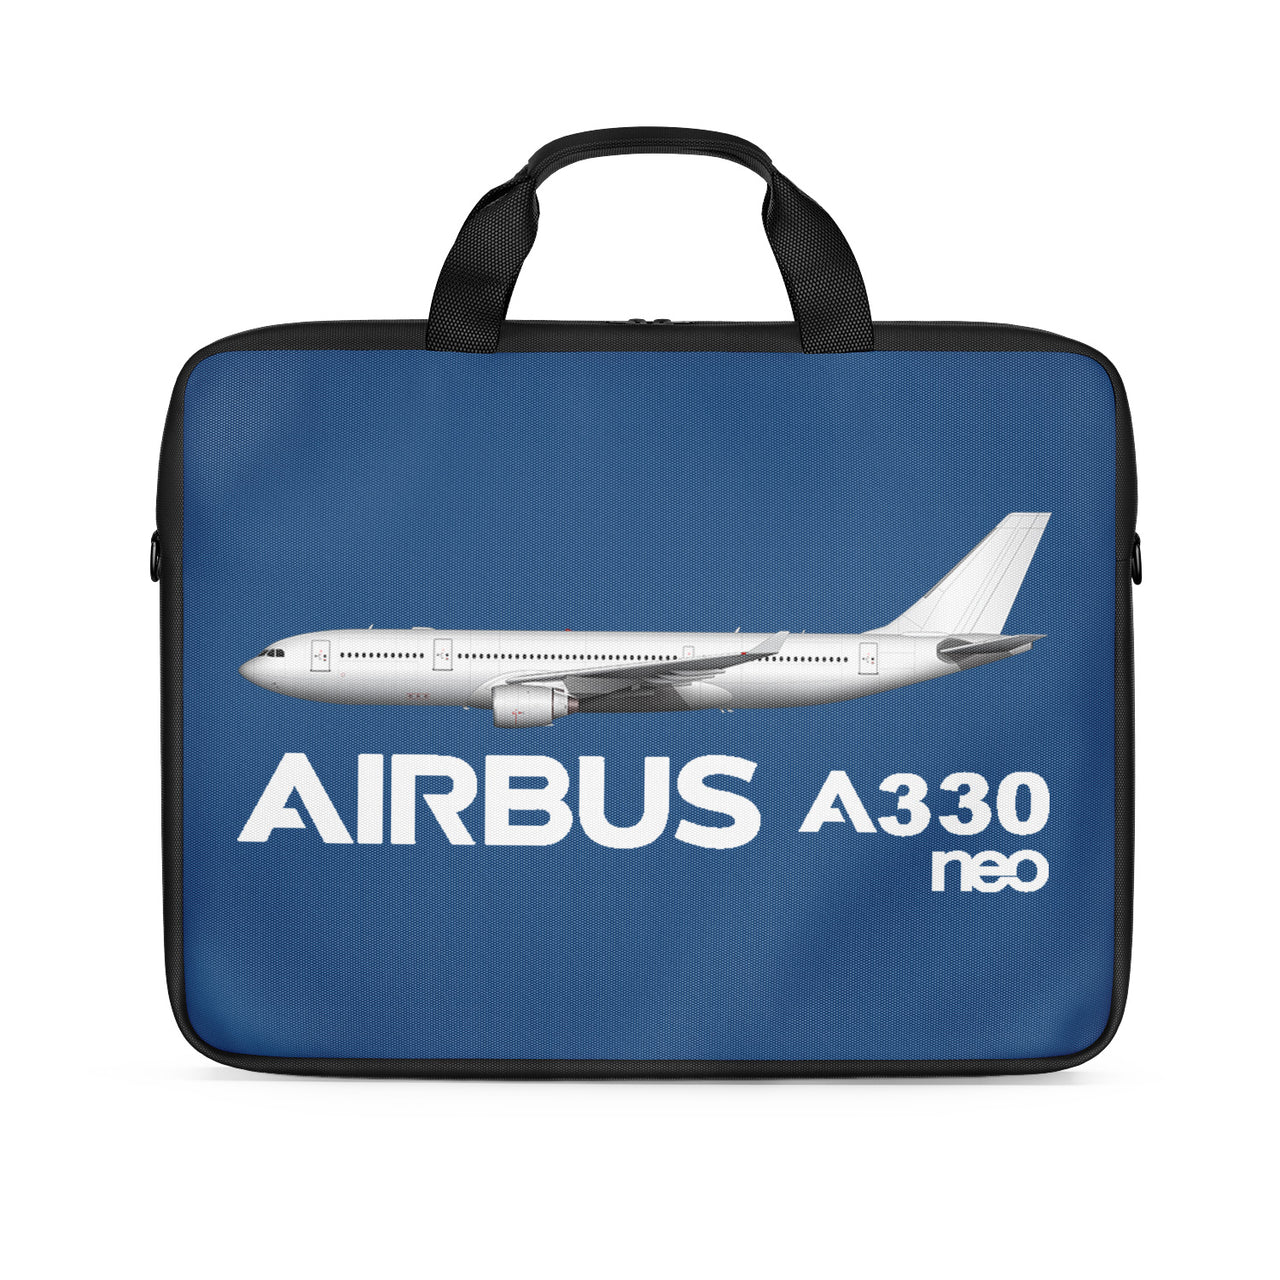 The Airbus A330neo Designed Laptop & Tablet Bags